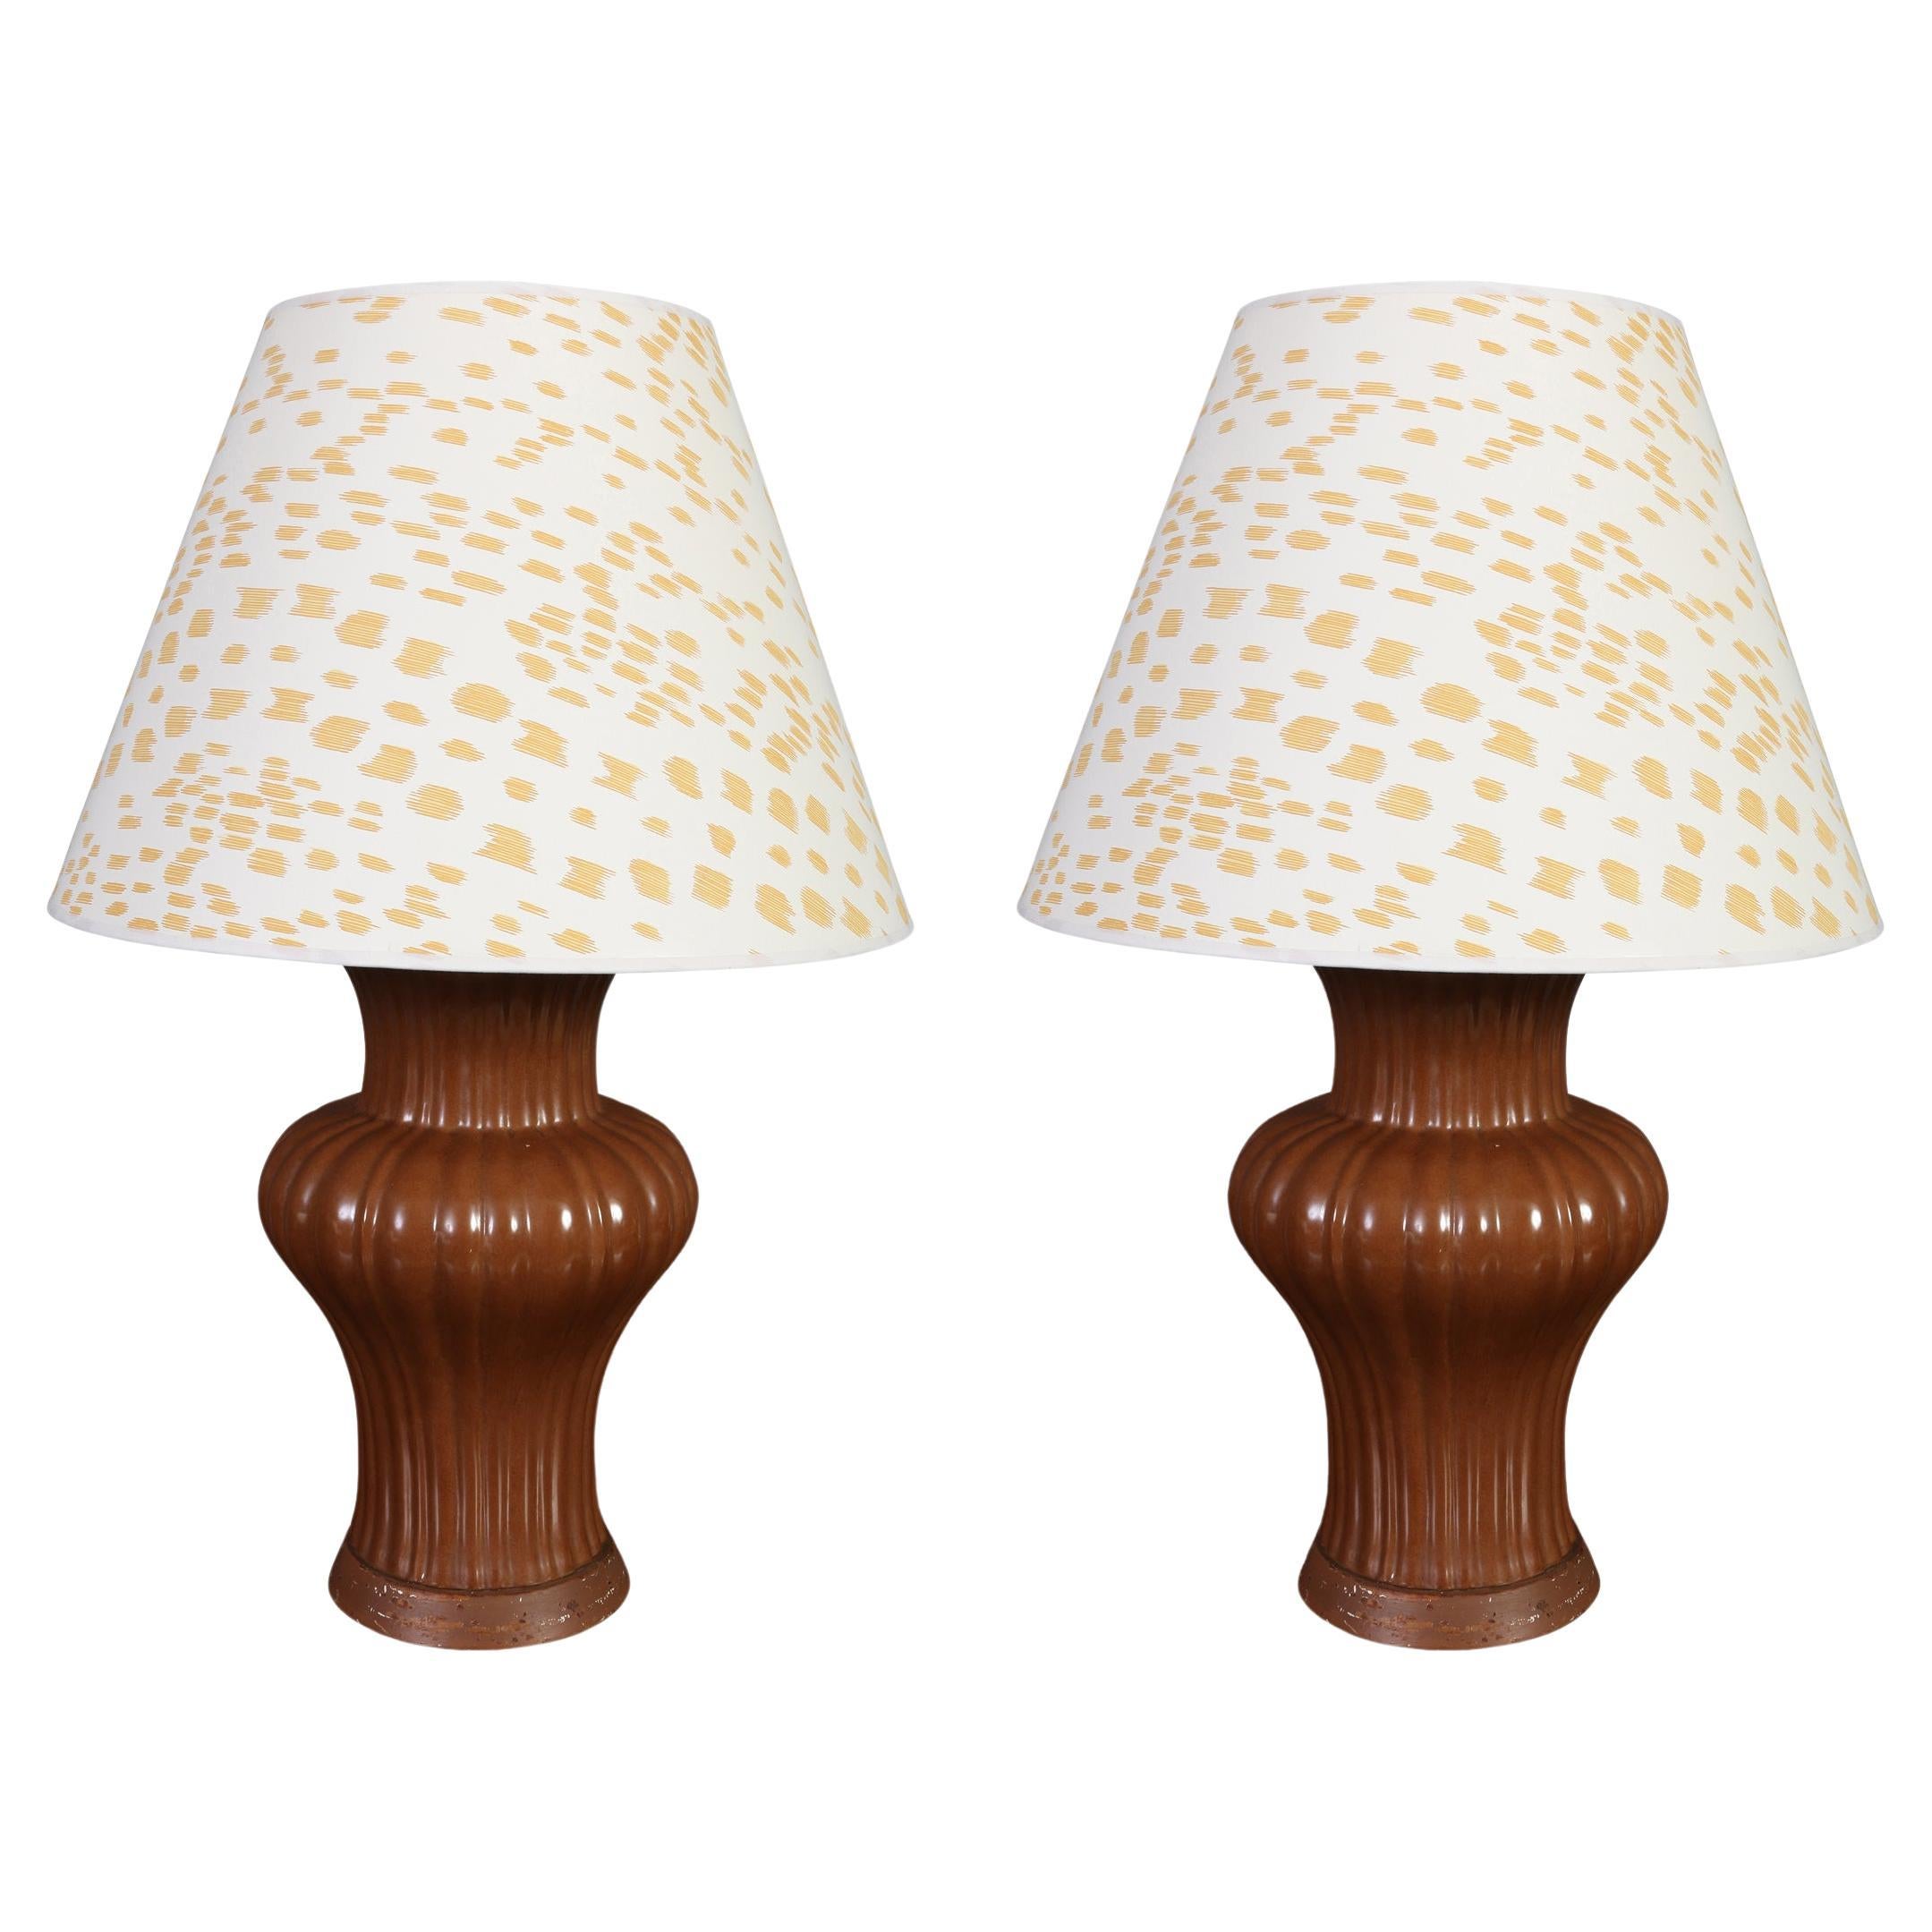 Pair of Christopher Spitzmiller Style Chocolate Brown Ceramic Lamps